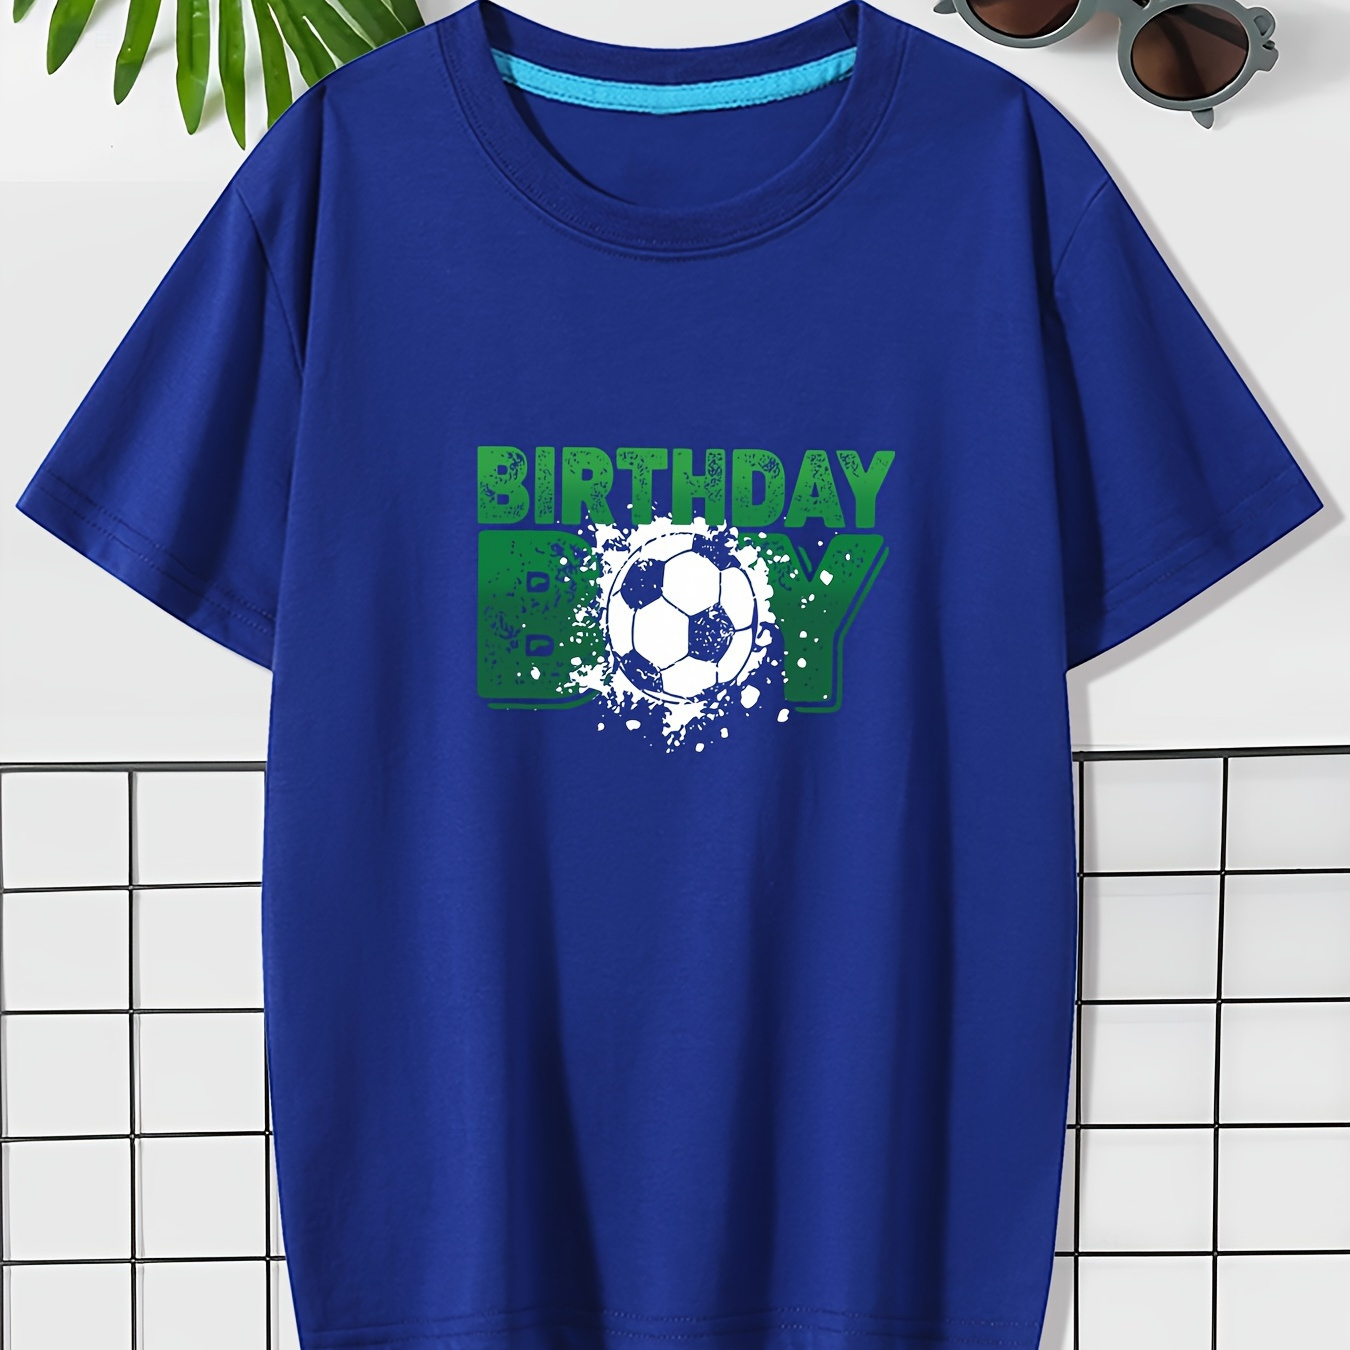 

Birthday Boy Soccer Print Casual Short Sleeve T-shirt For Boys, Cool Comfy Boxy Loose Fitting Versatile Trendy Graphic Tee Boys Summer Outfits Clothes